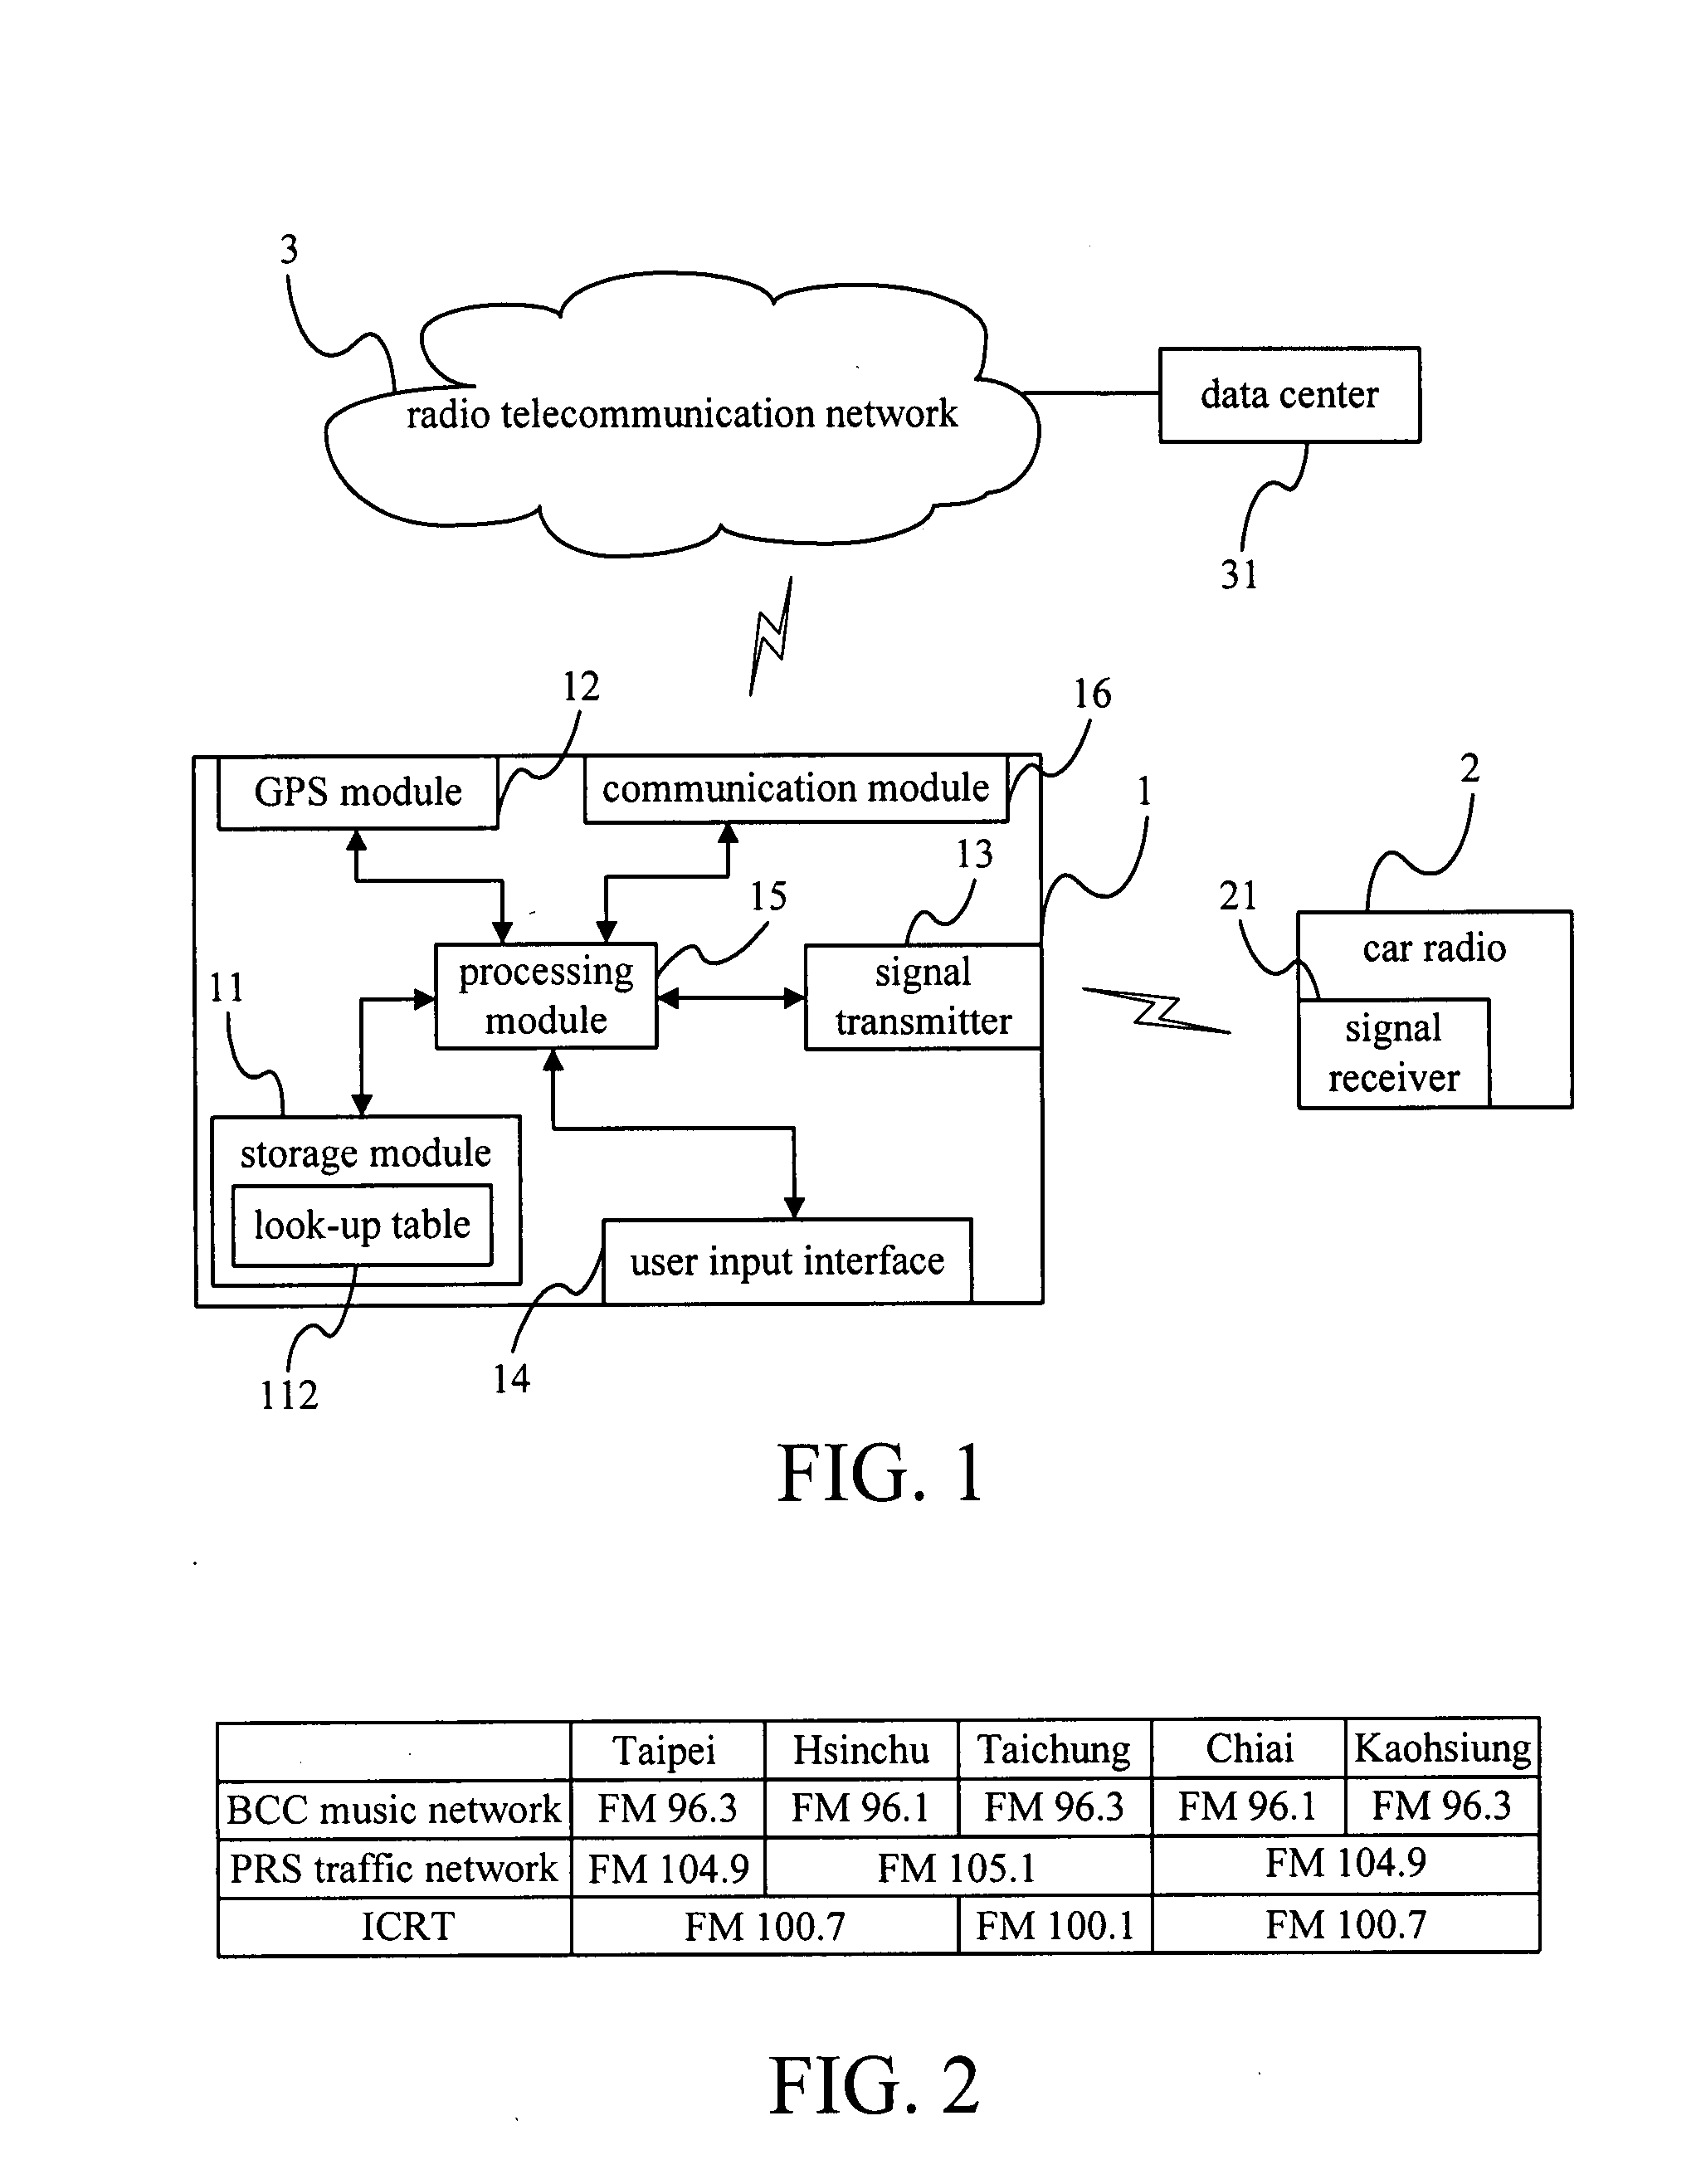 Mobile electronic apparatus capable of assisting car radio in tuning radio channel